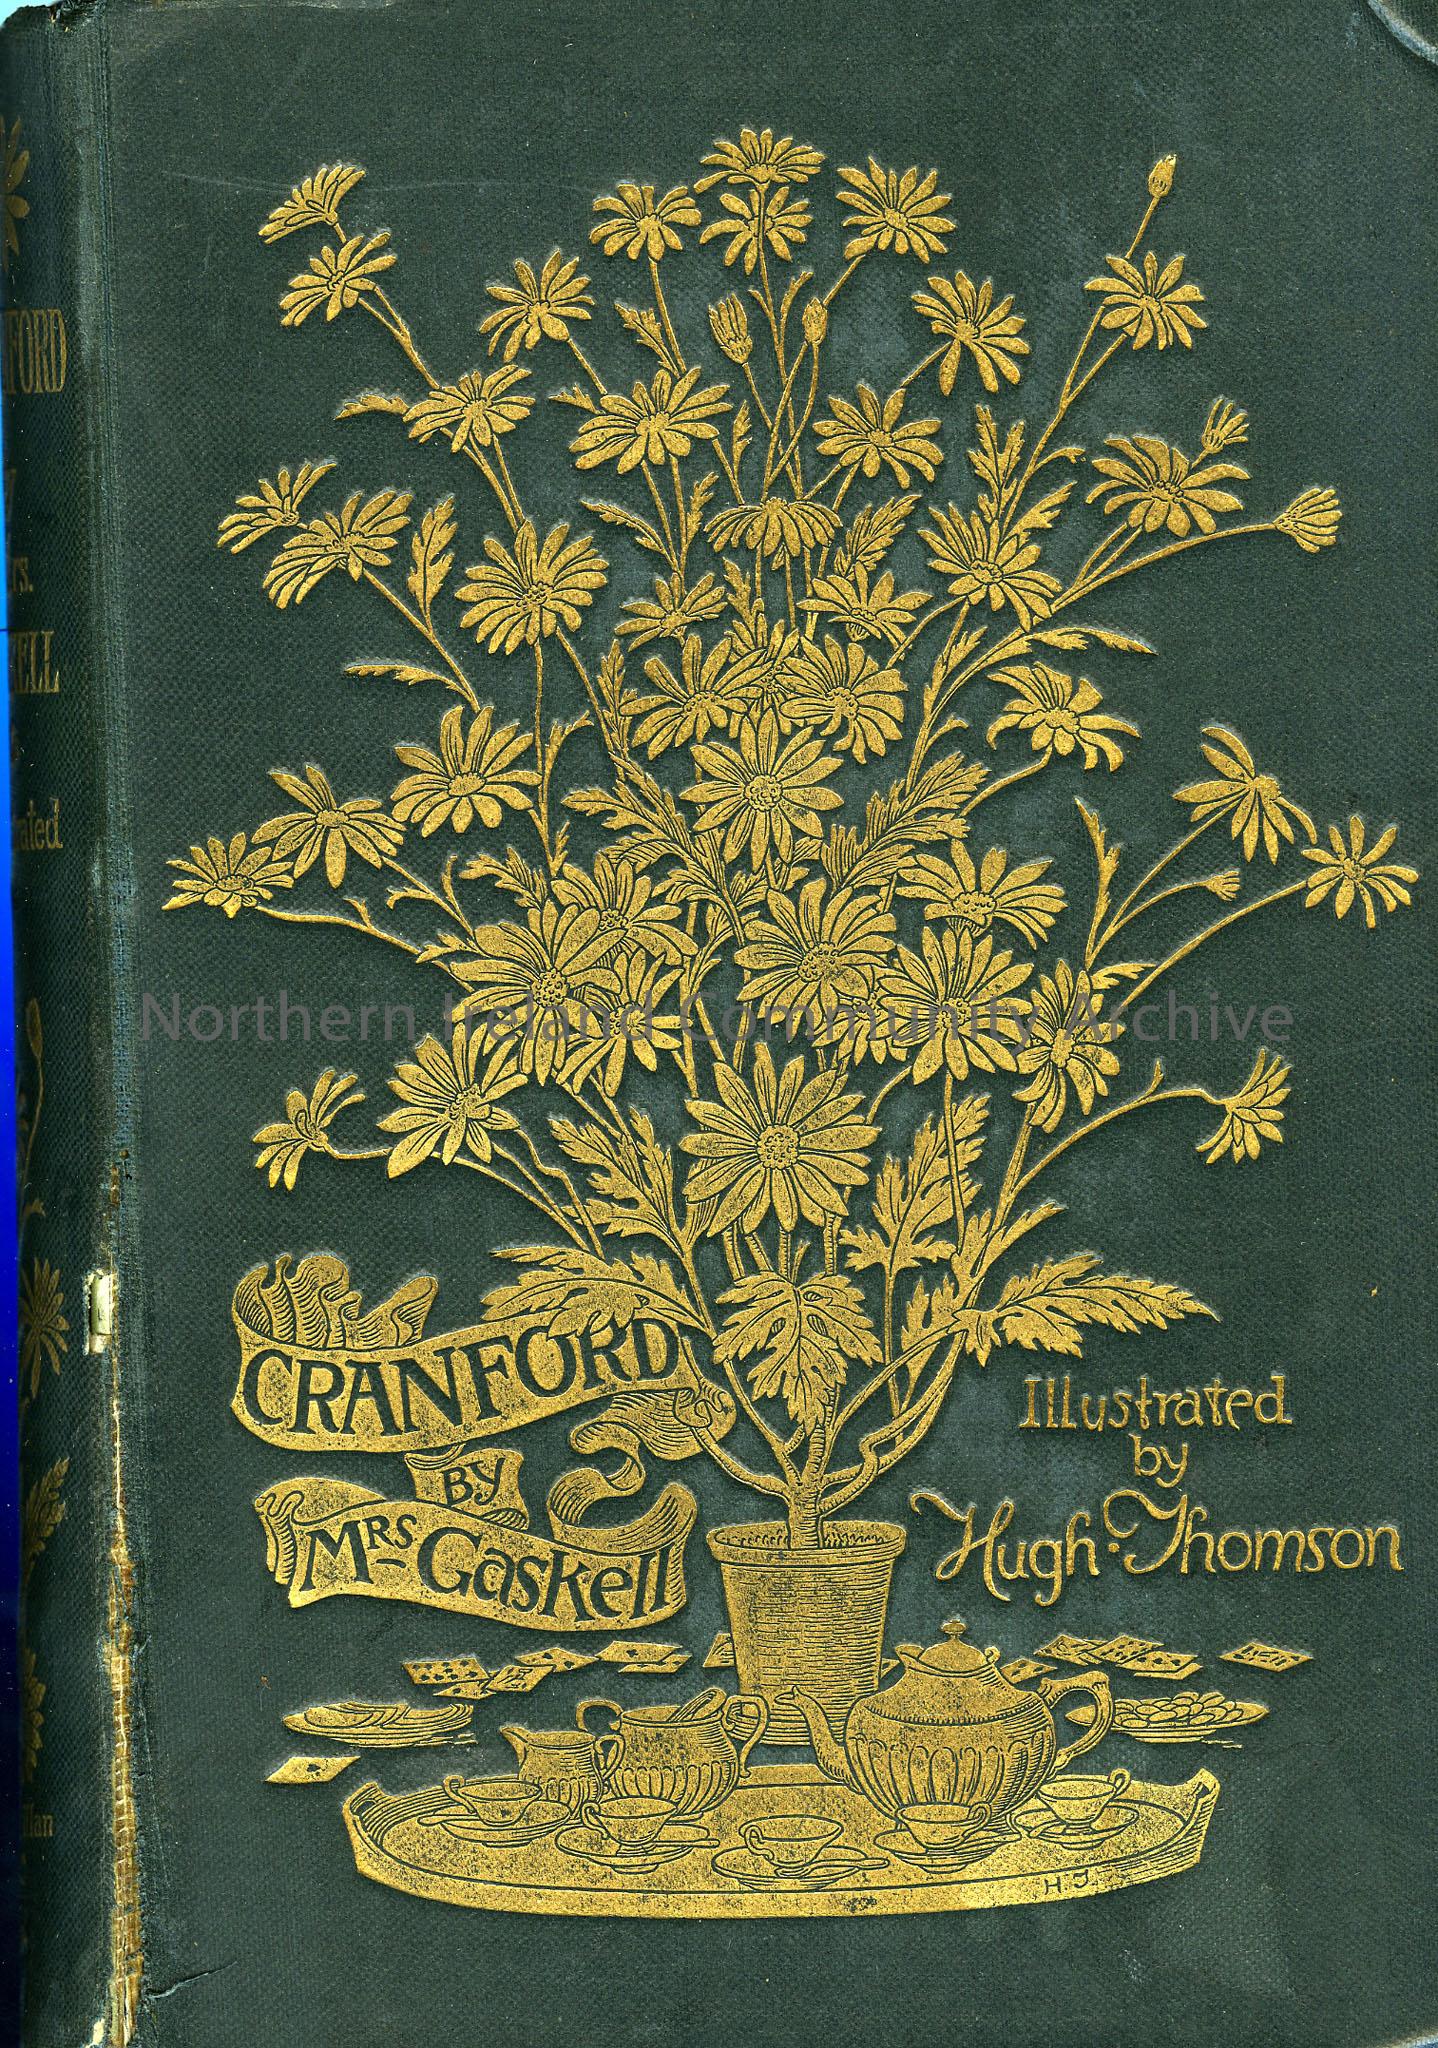 ‘Cranford’ by Mrs Gaskell, illustrated by Hugh Thomson, with a preface by Anne Thackeray Ritchie